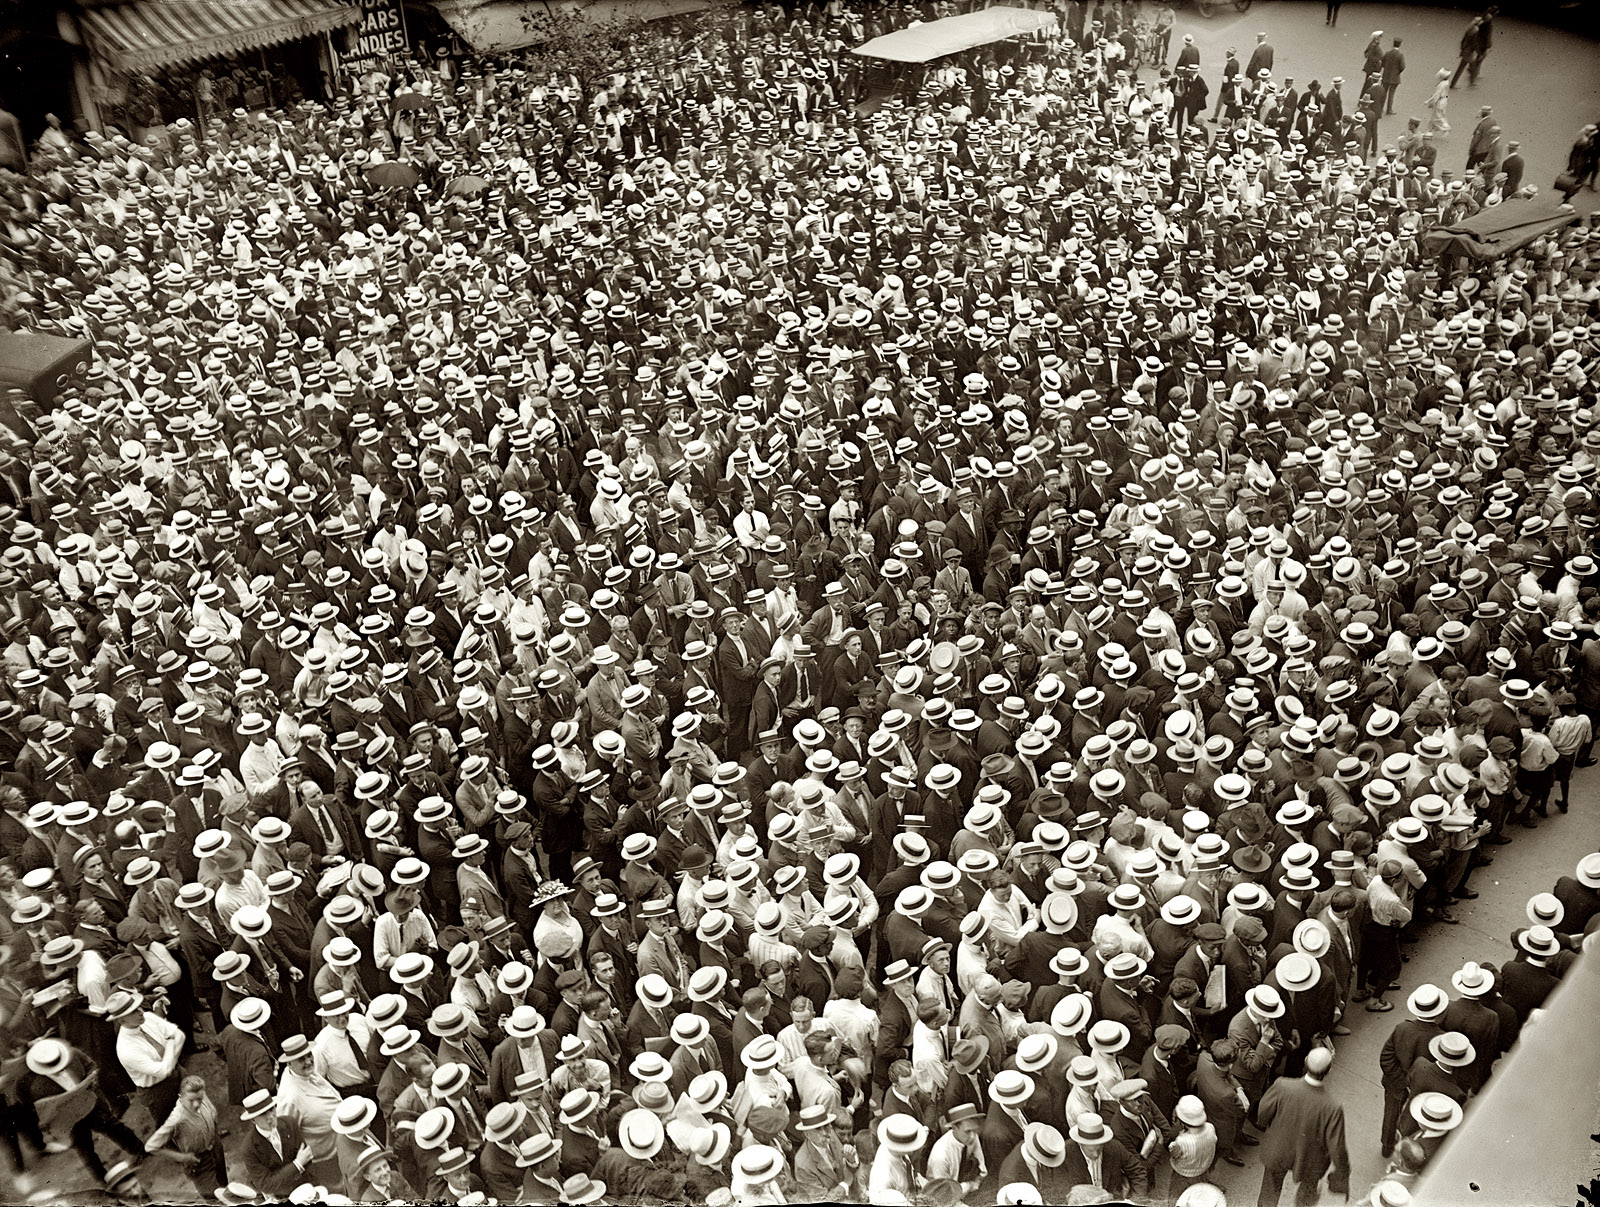 July 2, 1921. Another view of those straw-hatted boxing fans following the Dempsey-Carpentier fight from the Washington Star building in Washington, D.C. View full size. National Photo Company Collection glass negative.